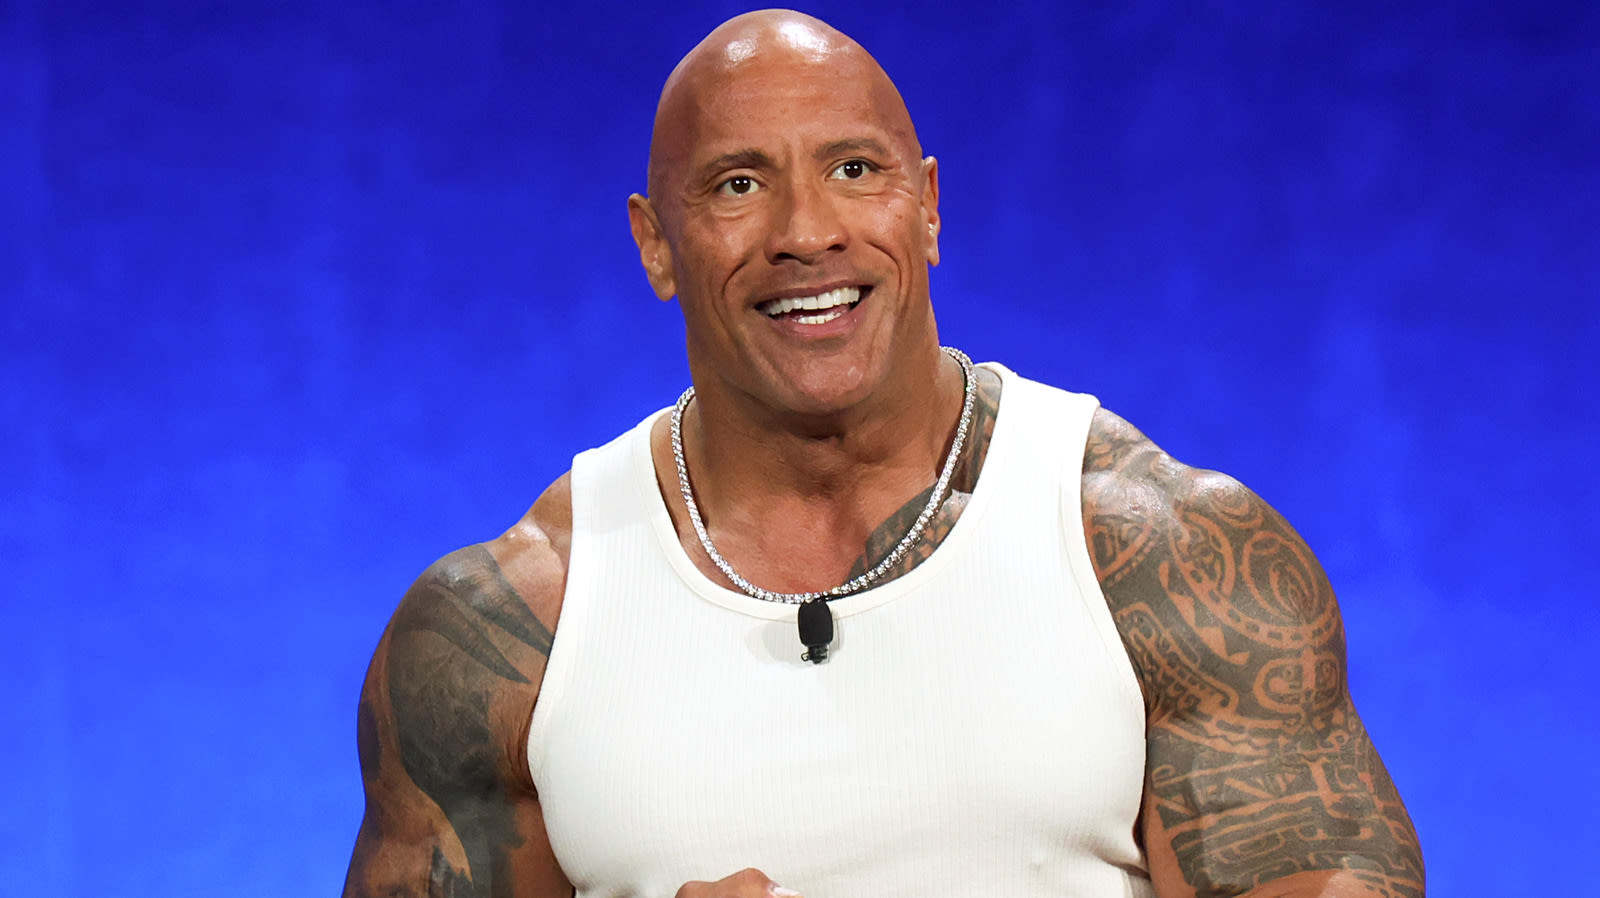 Dwayne 'The Rock' Johnson, Seven Bucks Productions Sign First-Look Deal With Disney - Wrestling Inc.